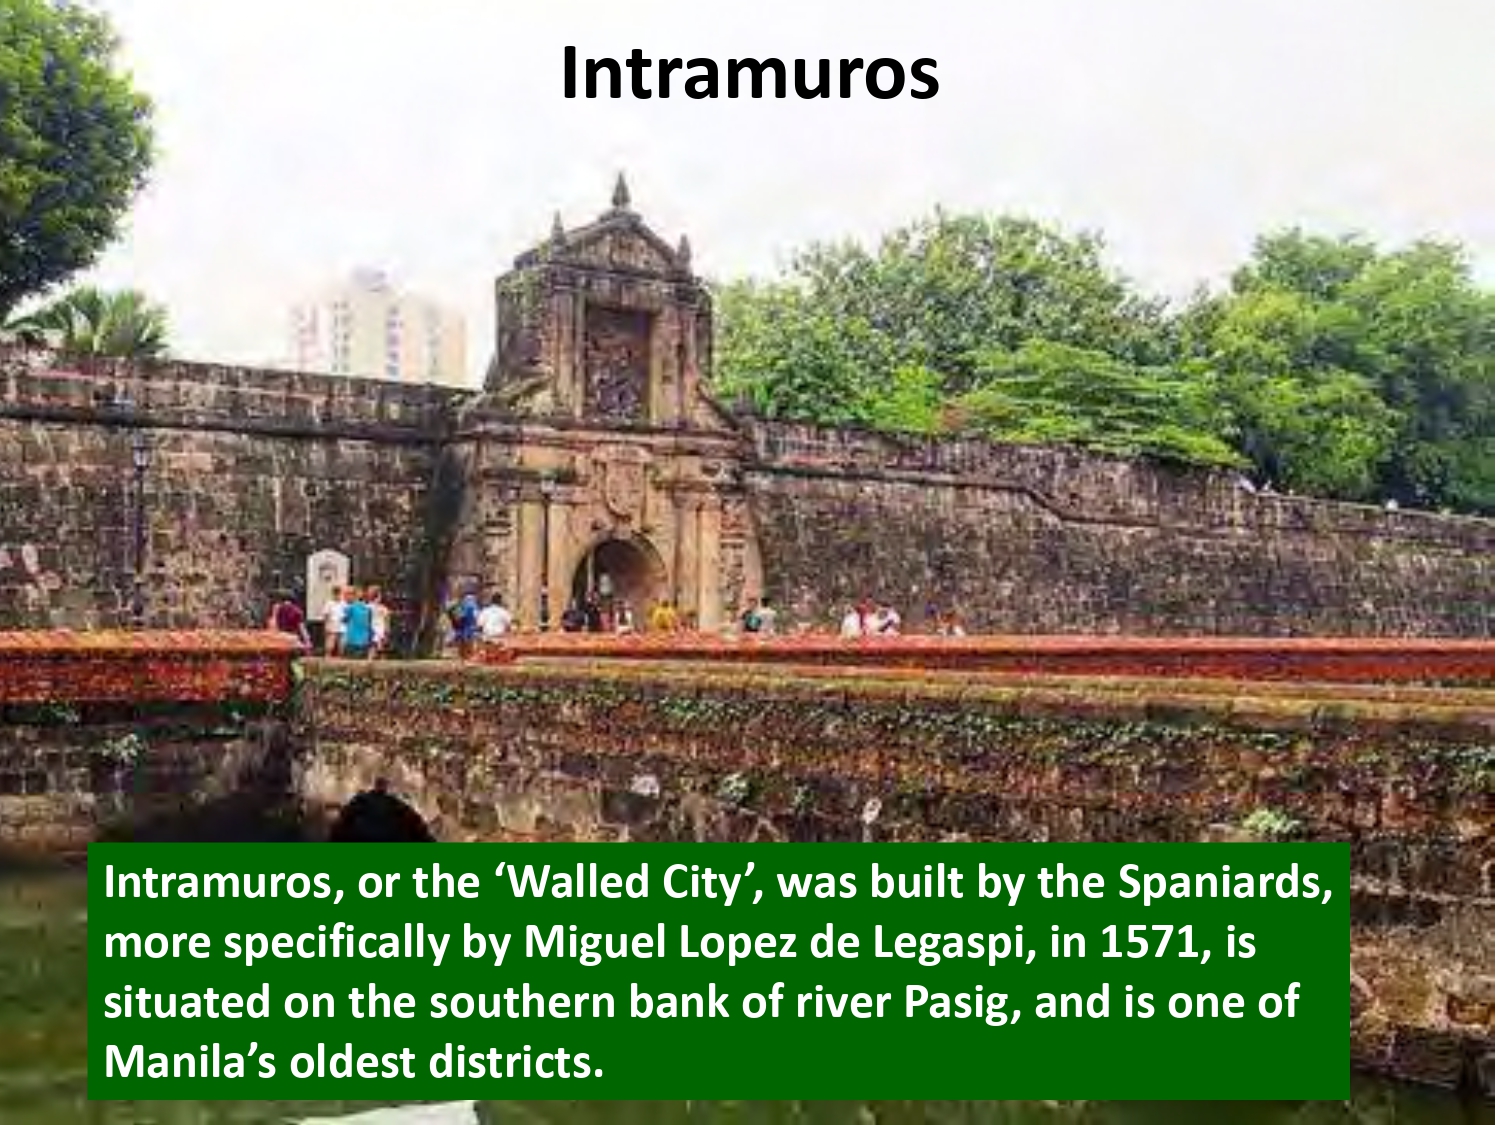 Intramuros, or the ‘Walled City’, was built by the Spaniards, more specifically by Miguel Lopez de Legaspi, in 1571, is situated on the southern bank of river Pasig, and is one of Manila’s oldest districts.